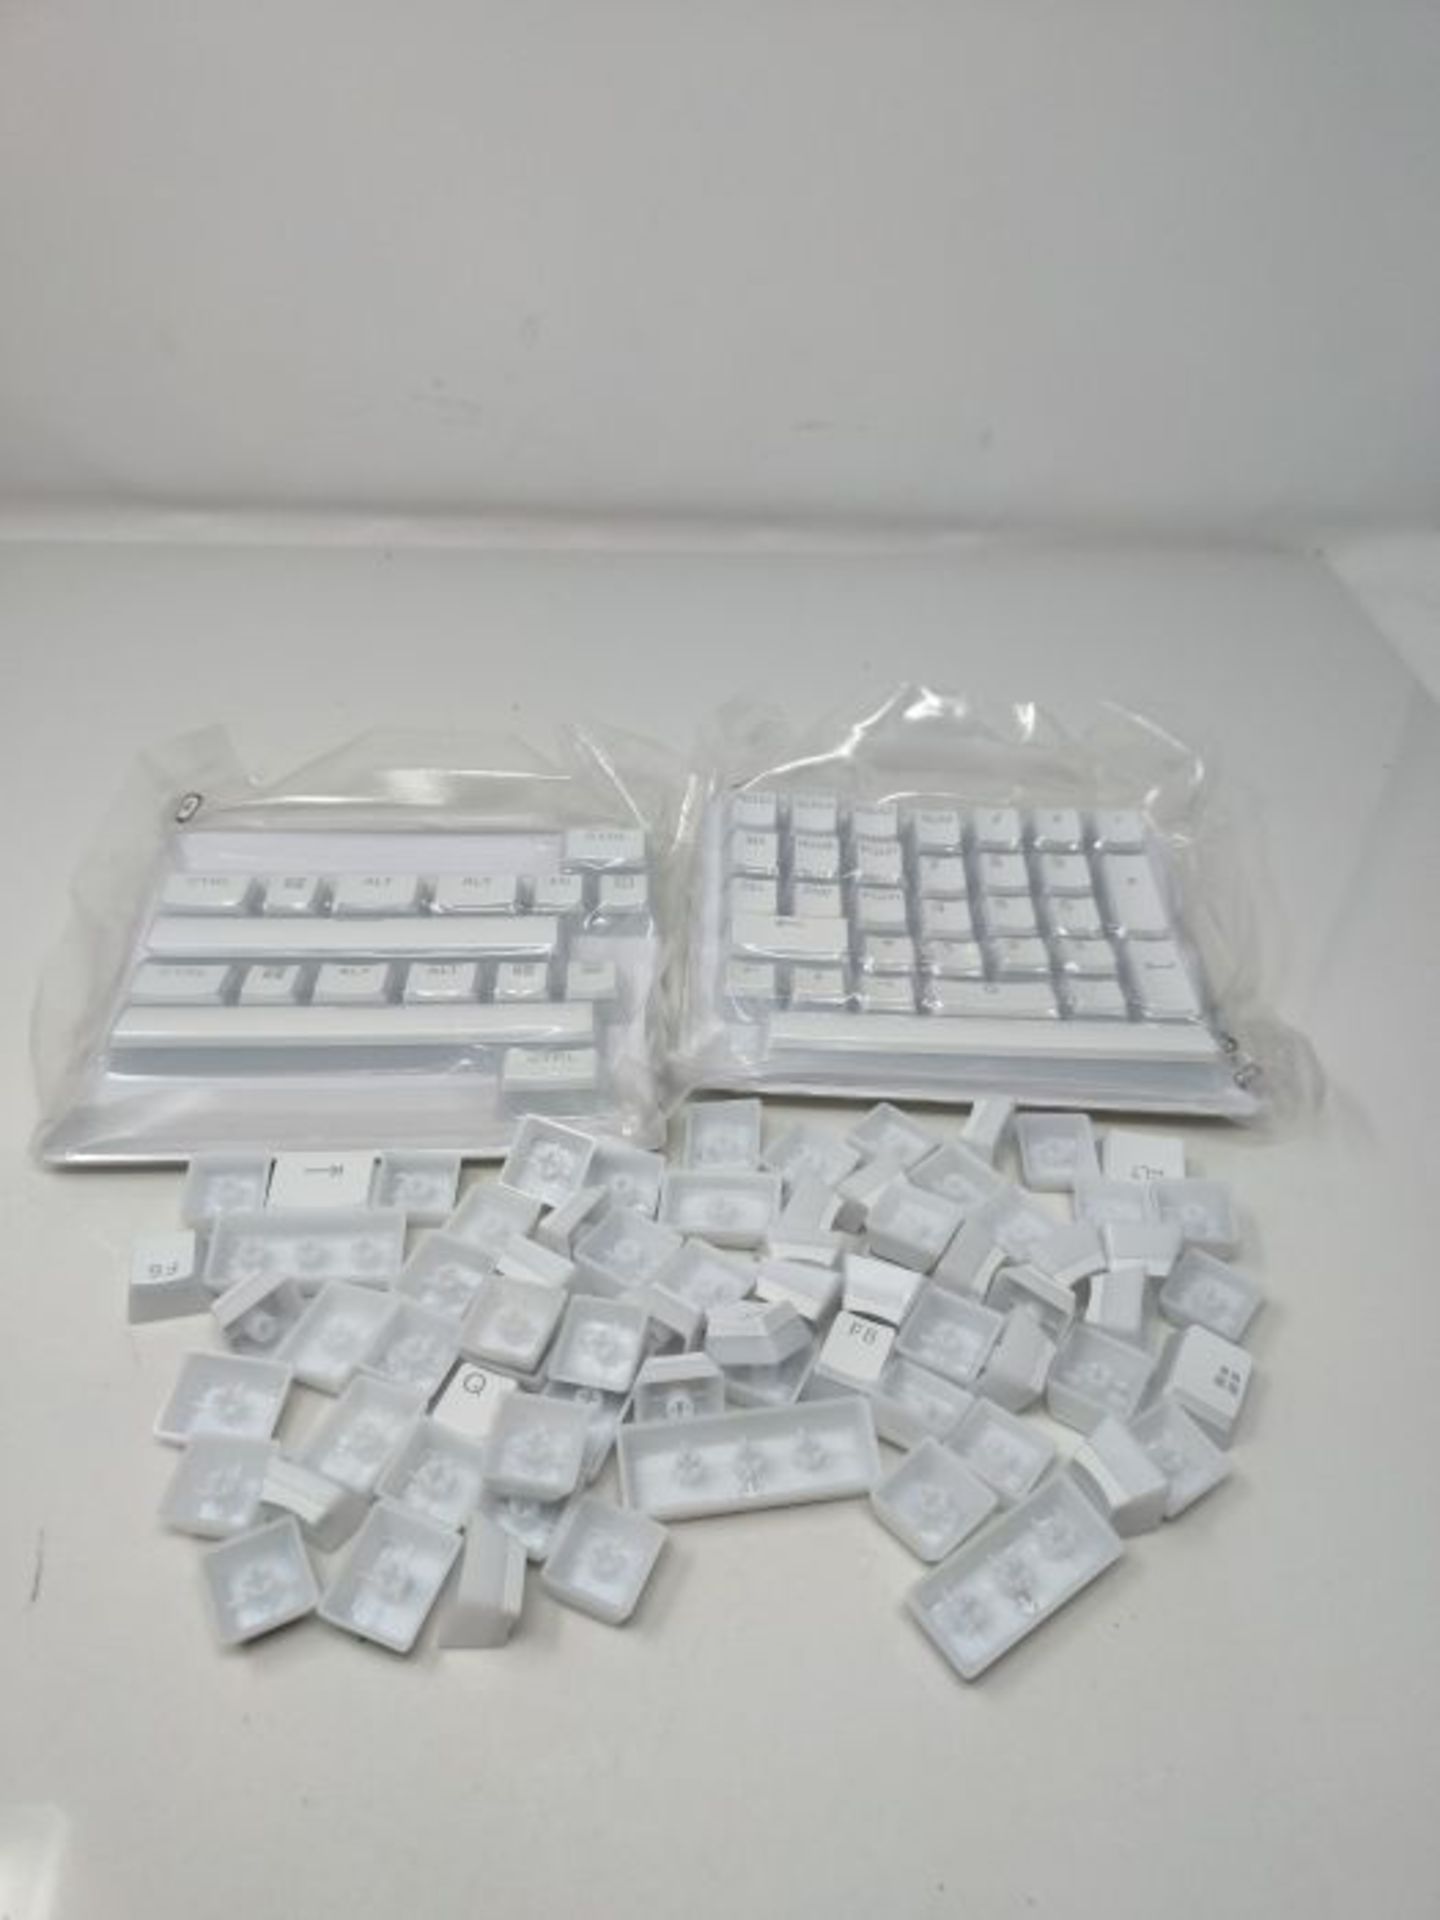 SteelSeries PrismCaps - Double Shot Pudding-style Keycaps - Durable PBT Thermoplastic - Image 3 of 3